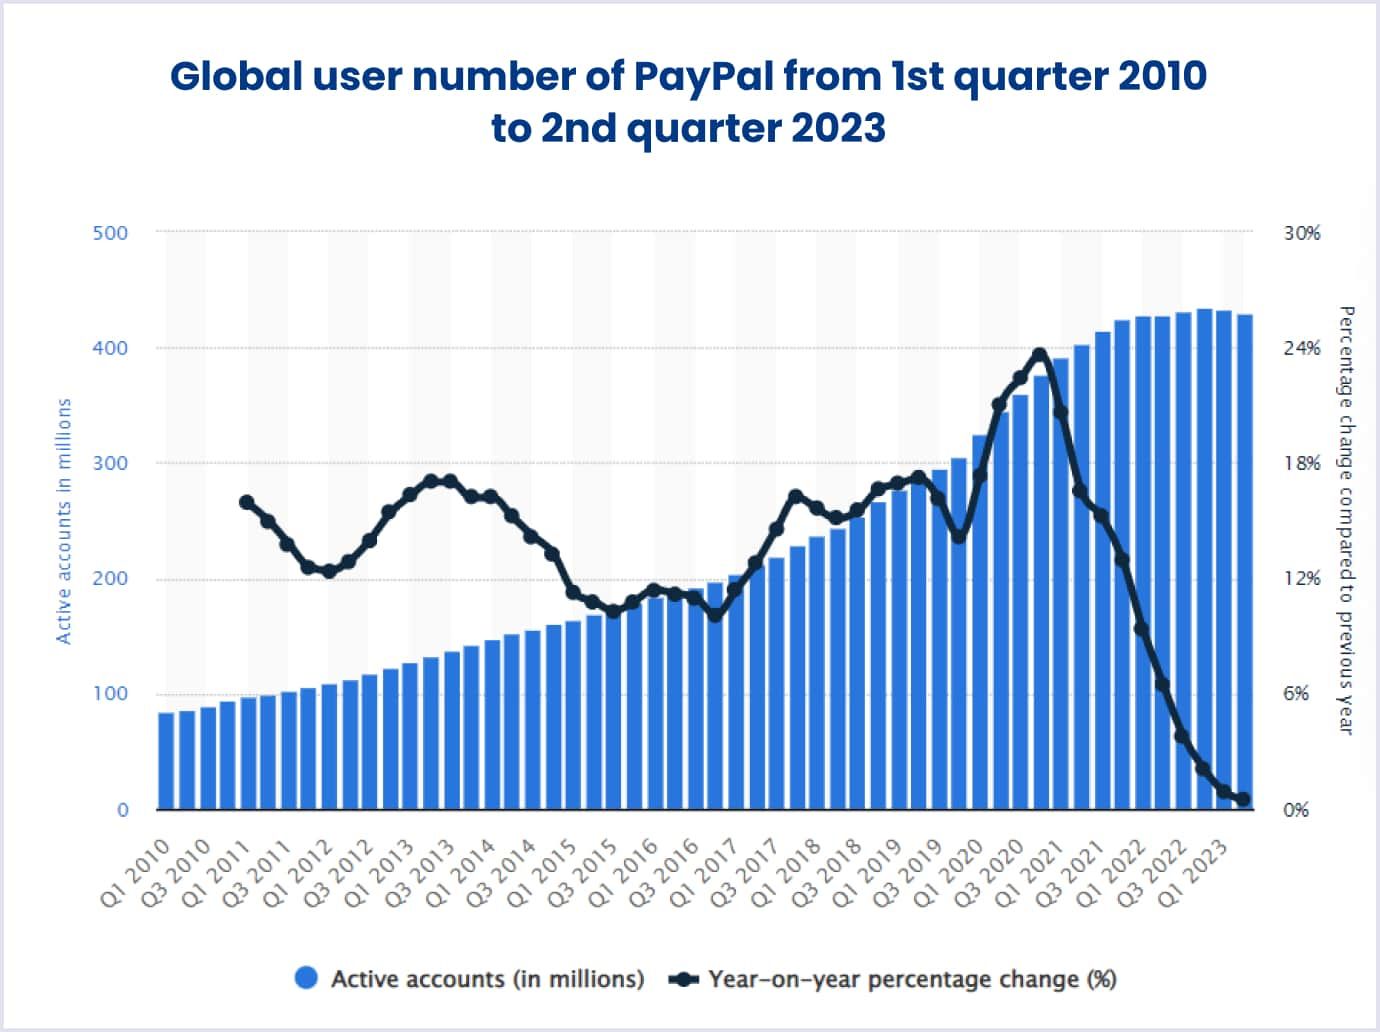 PayPal active users globally